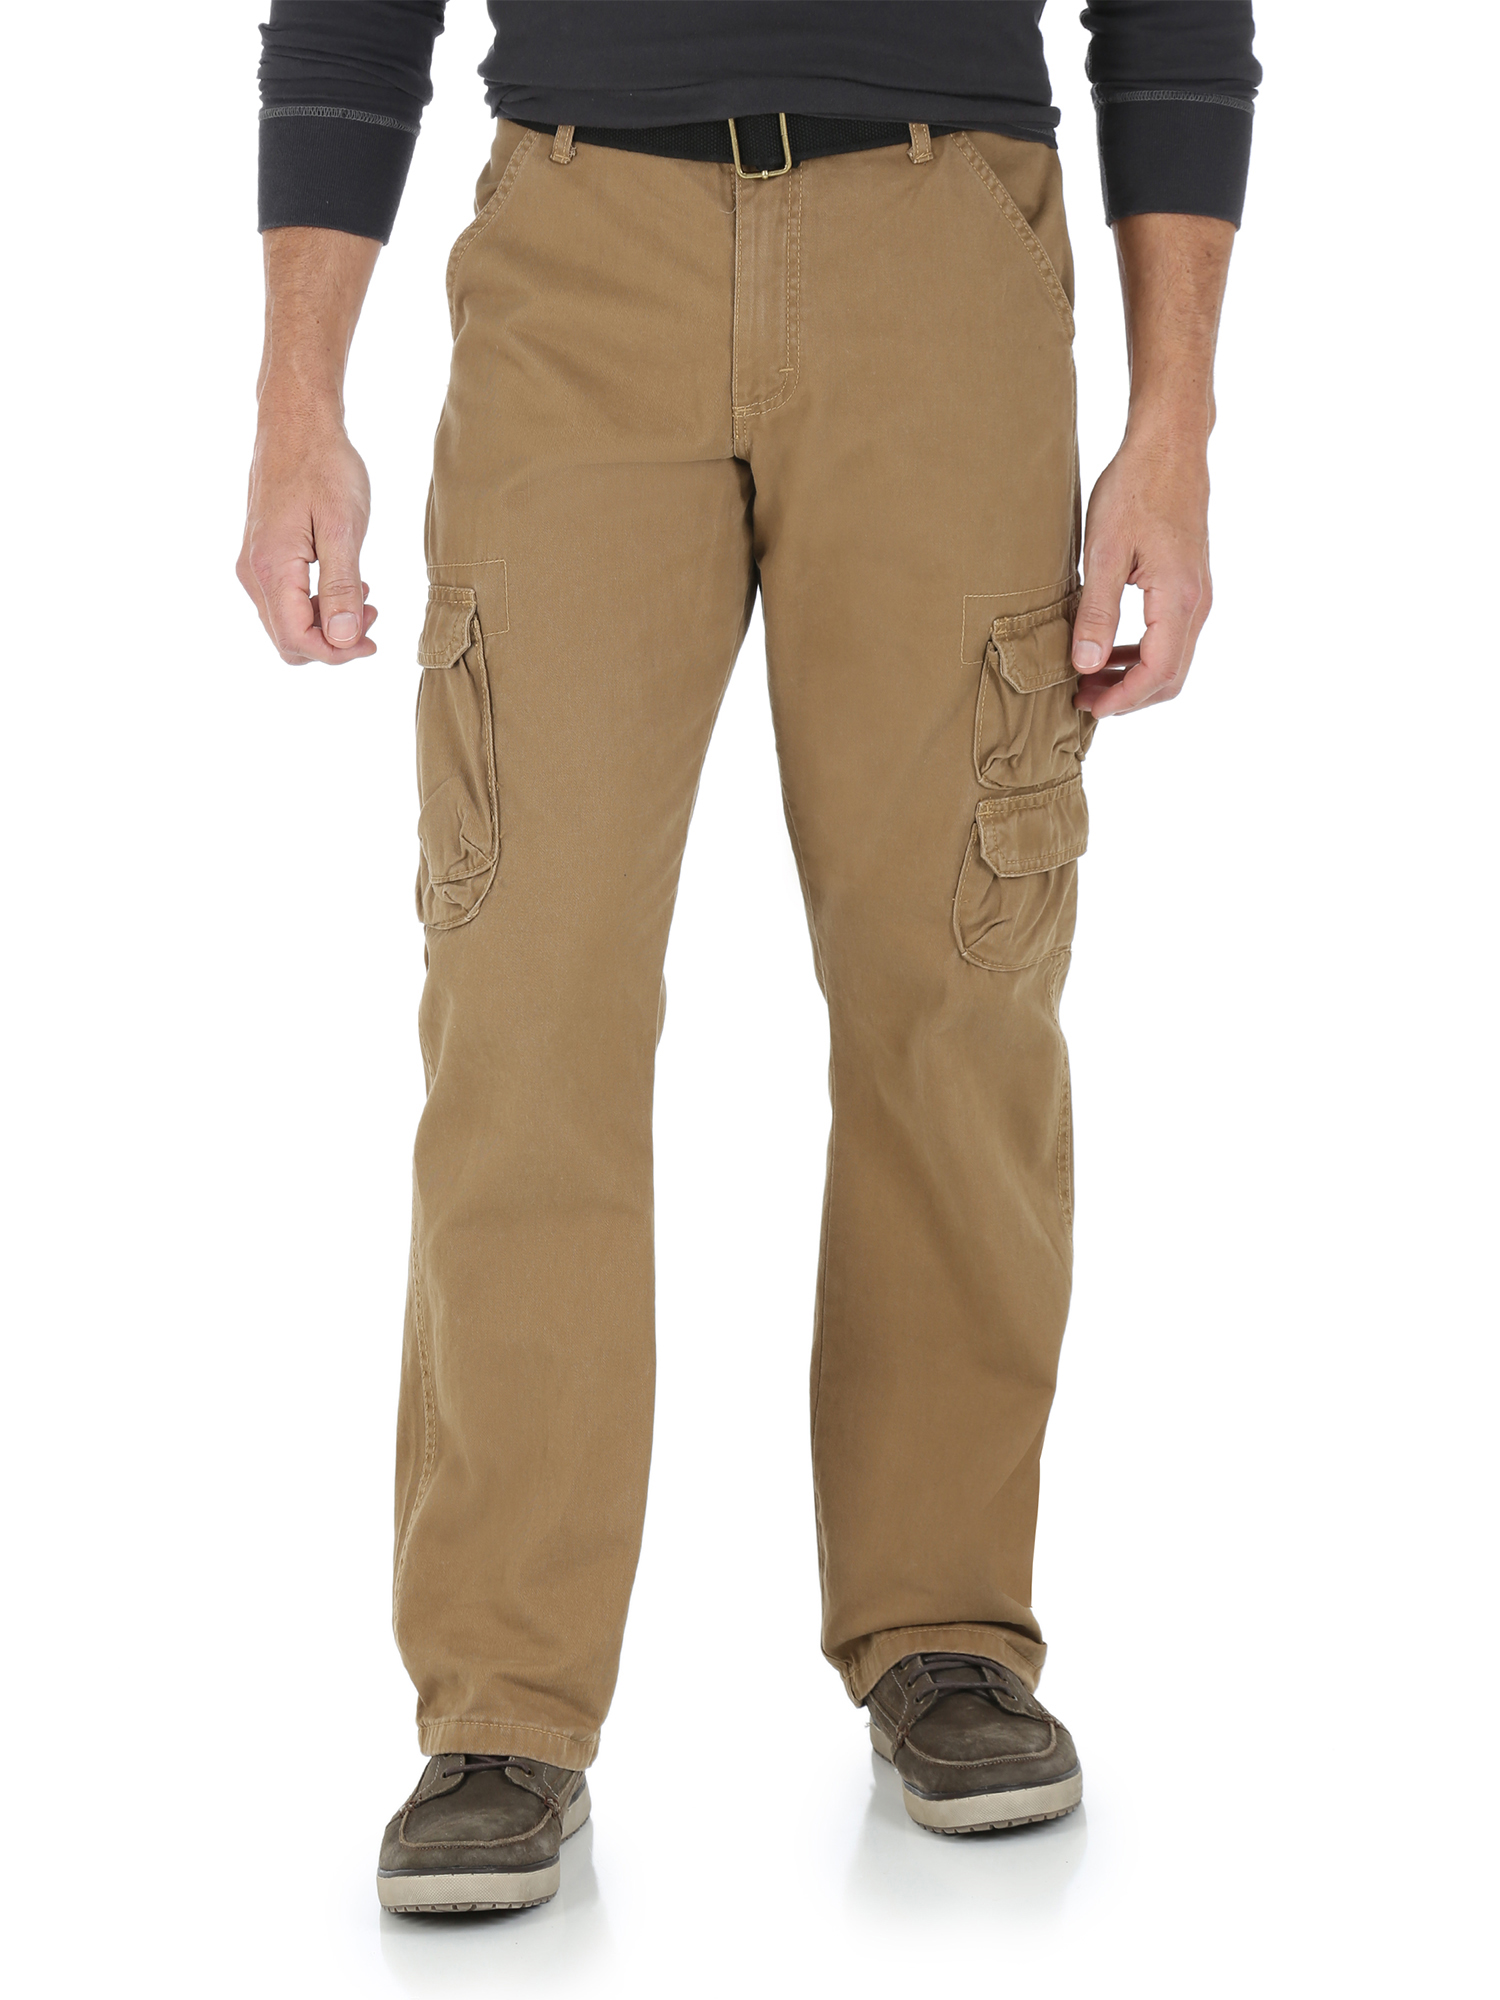 Men's Belted Twill Cargo Pant - image 1 of 2